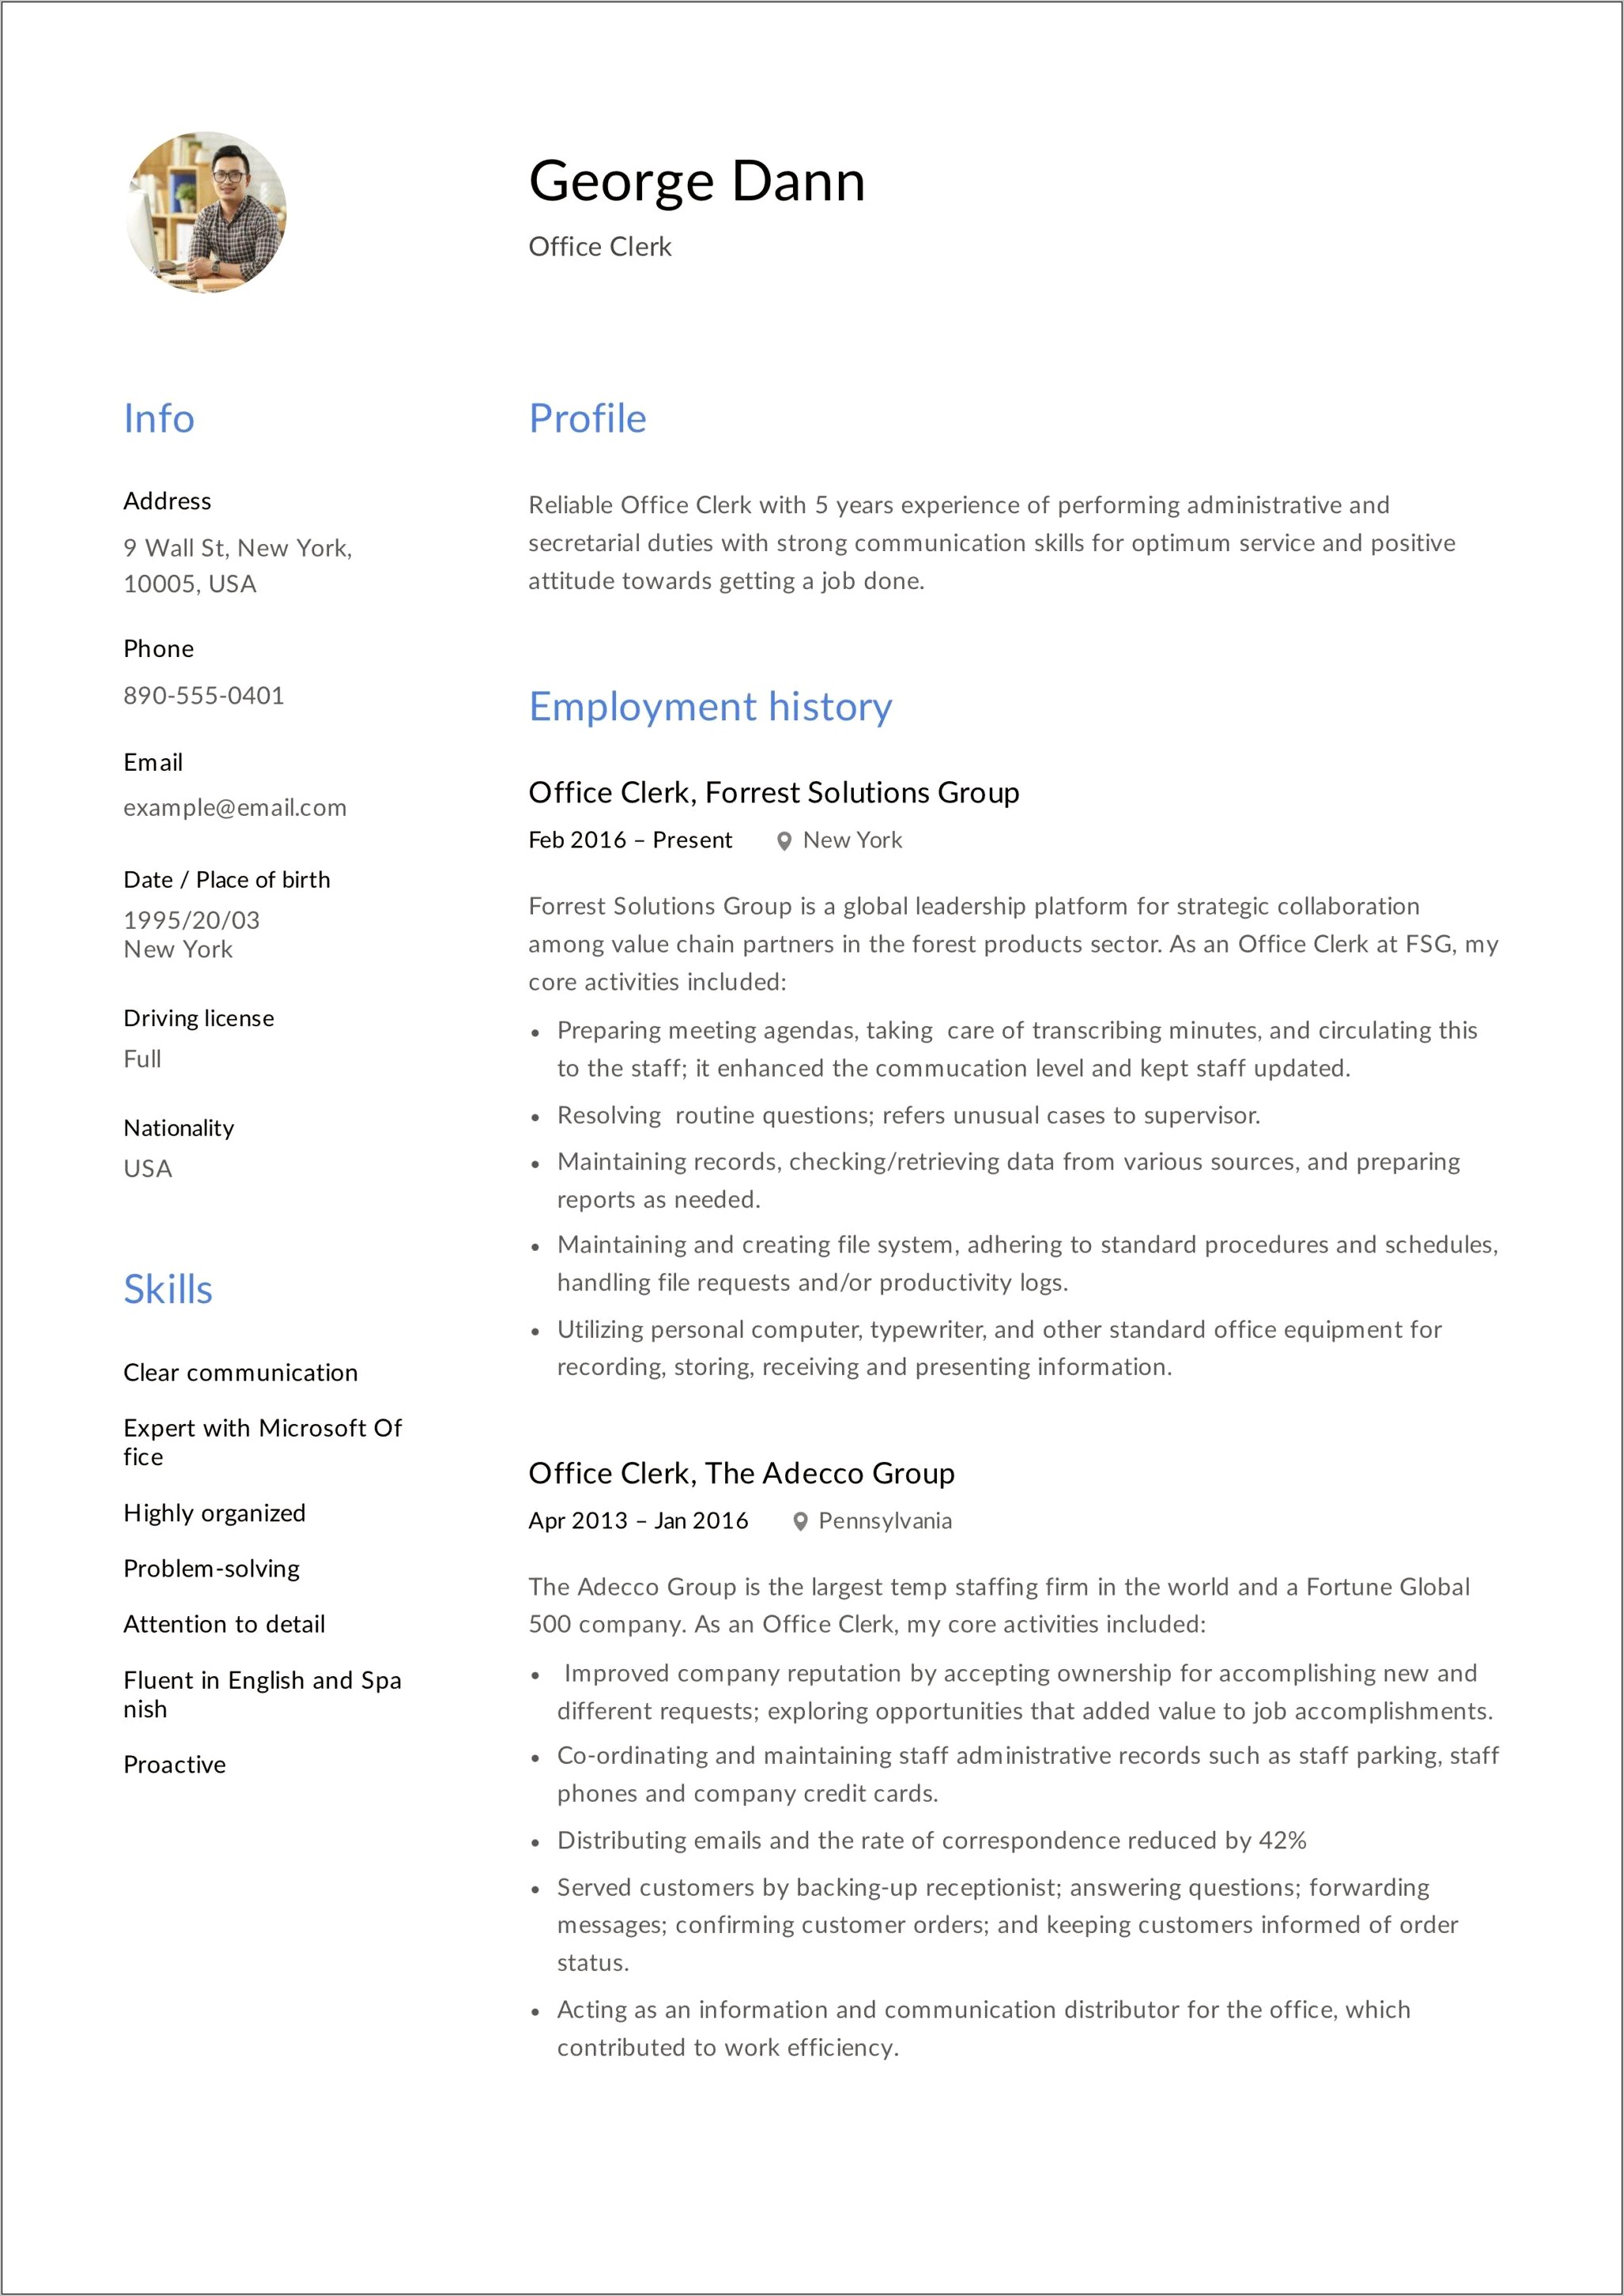 Resume For Office Staff No Experience